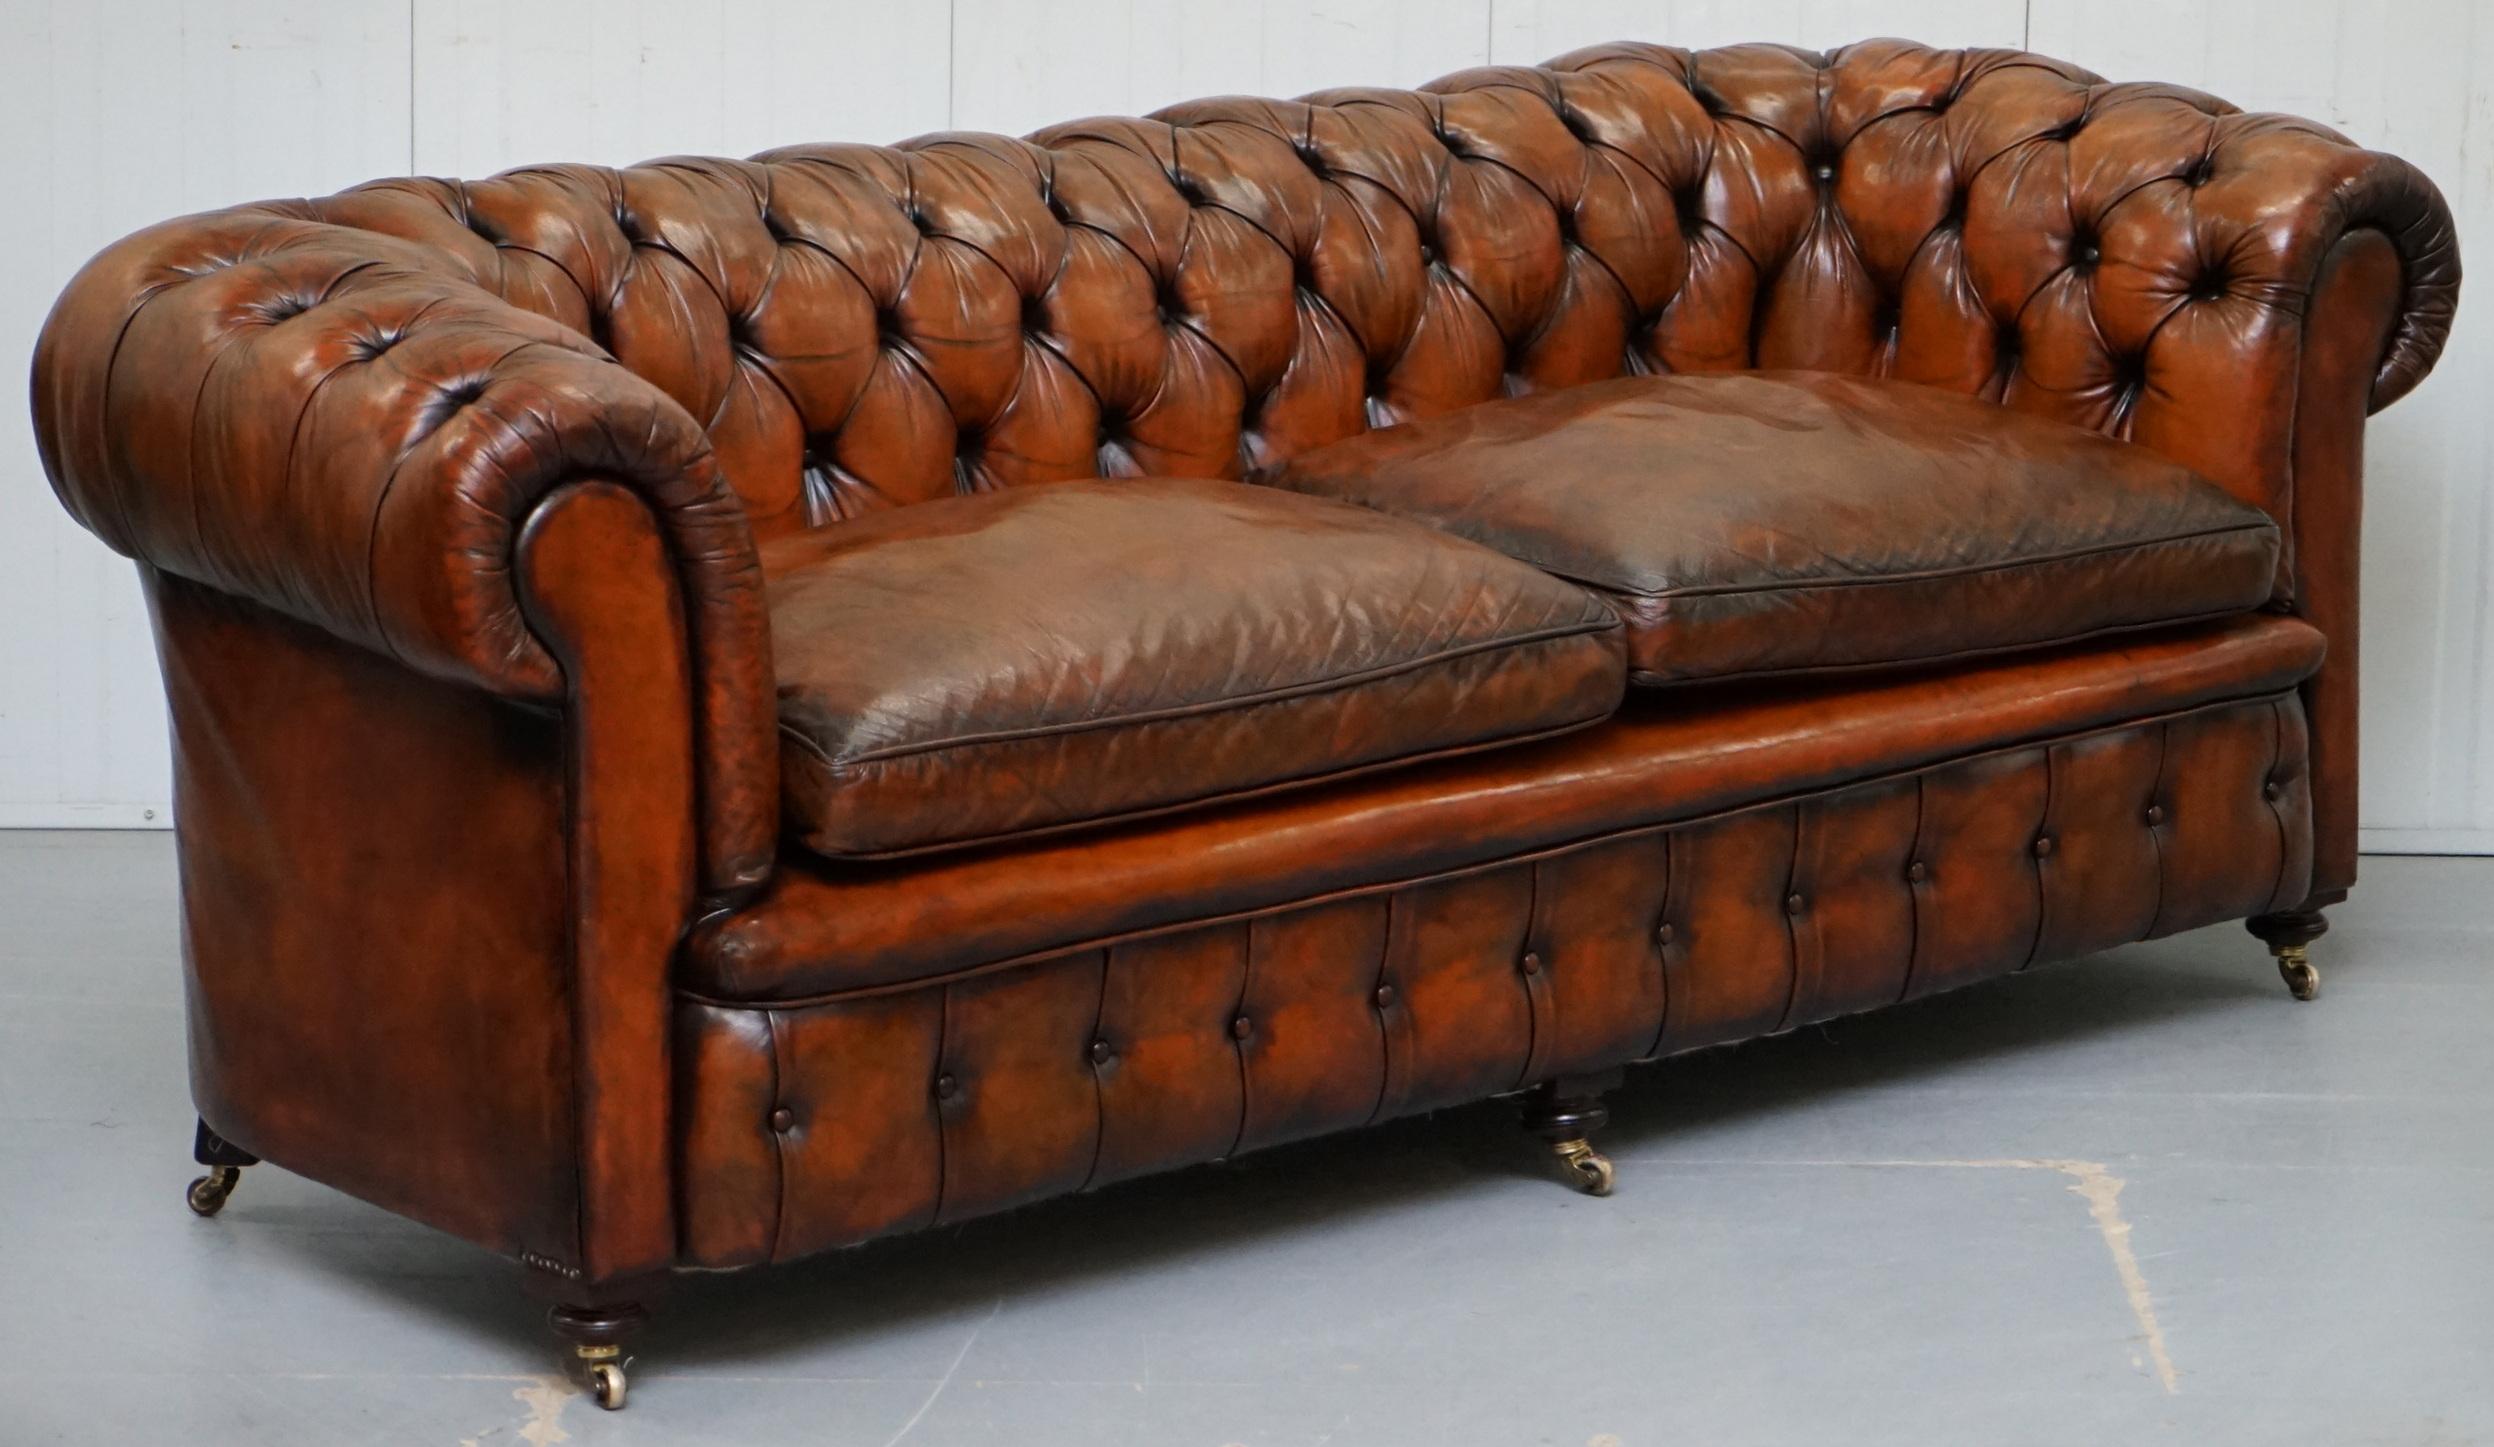 We are delighted to offer for sale this very rare fully restored circa 1880 hand dyed Whiskey brown leather Chesterfield sofa with original horse hair padding, coil sprung all over and feather filled cushions 

This sofa is a very rare model, its